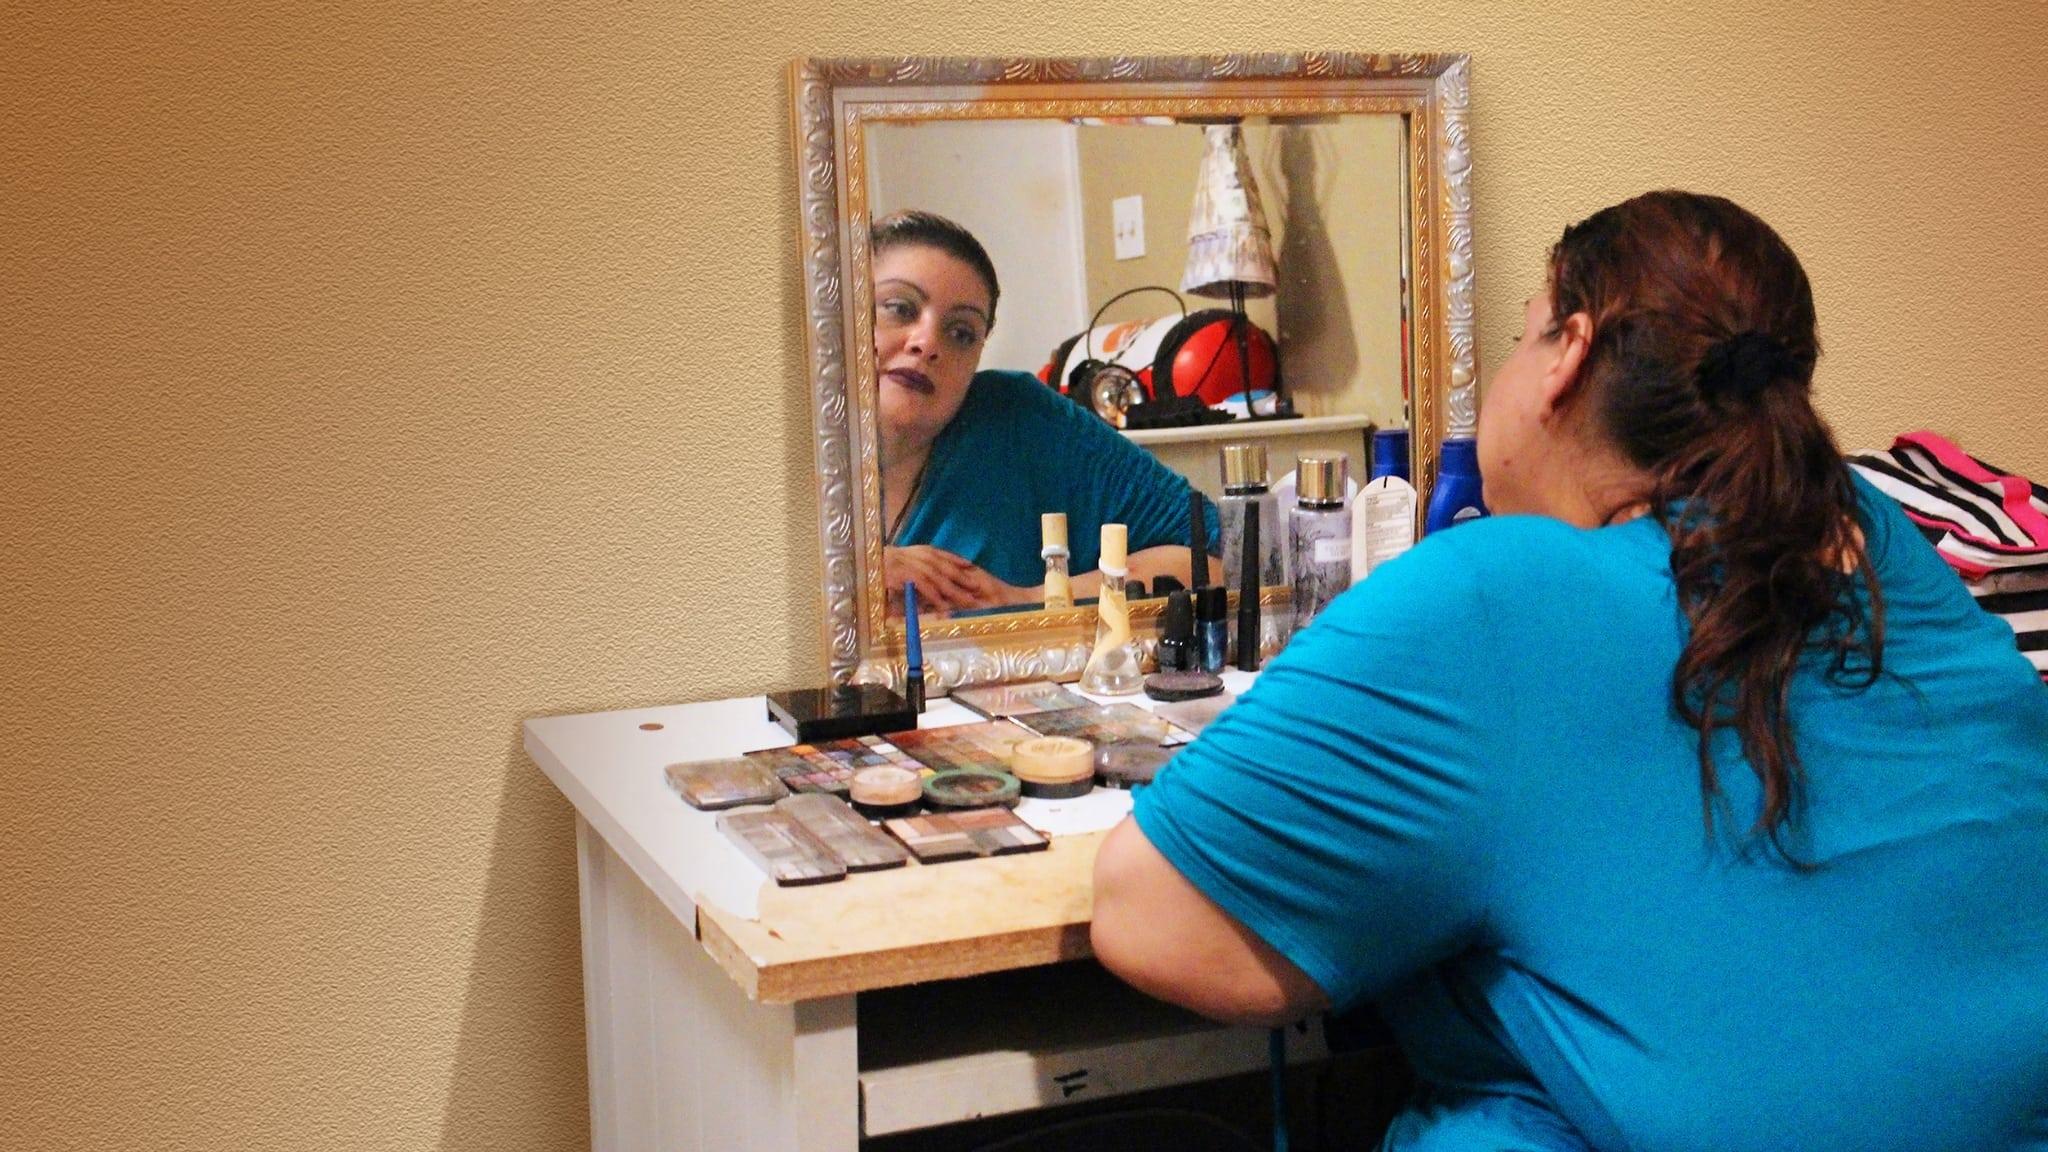 My 600-lb Life: Where Are They Now? backdrop